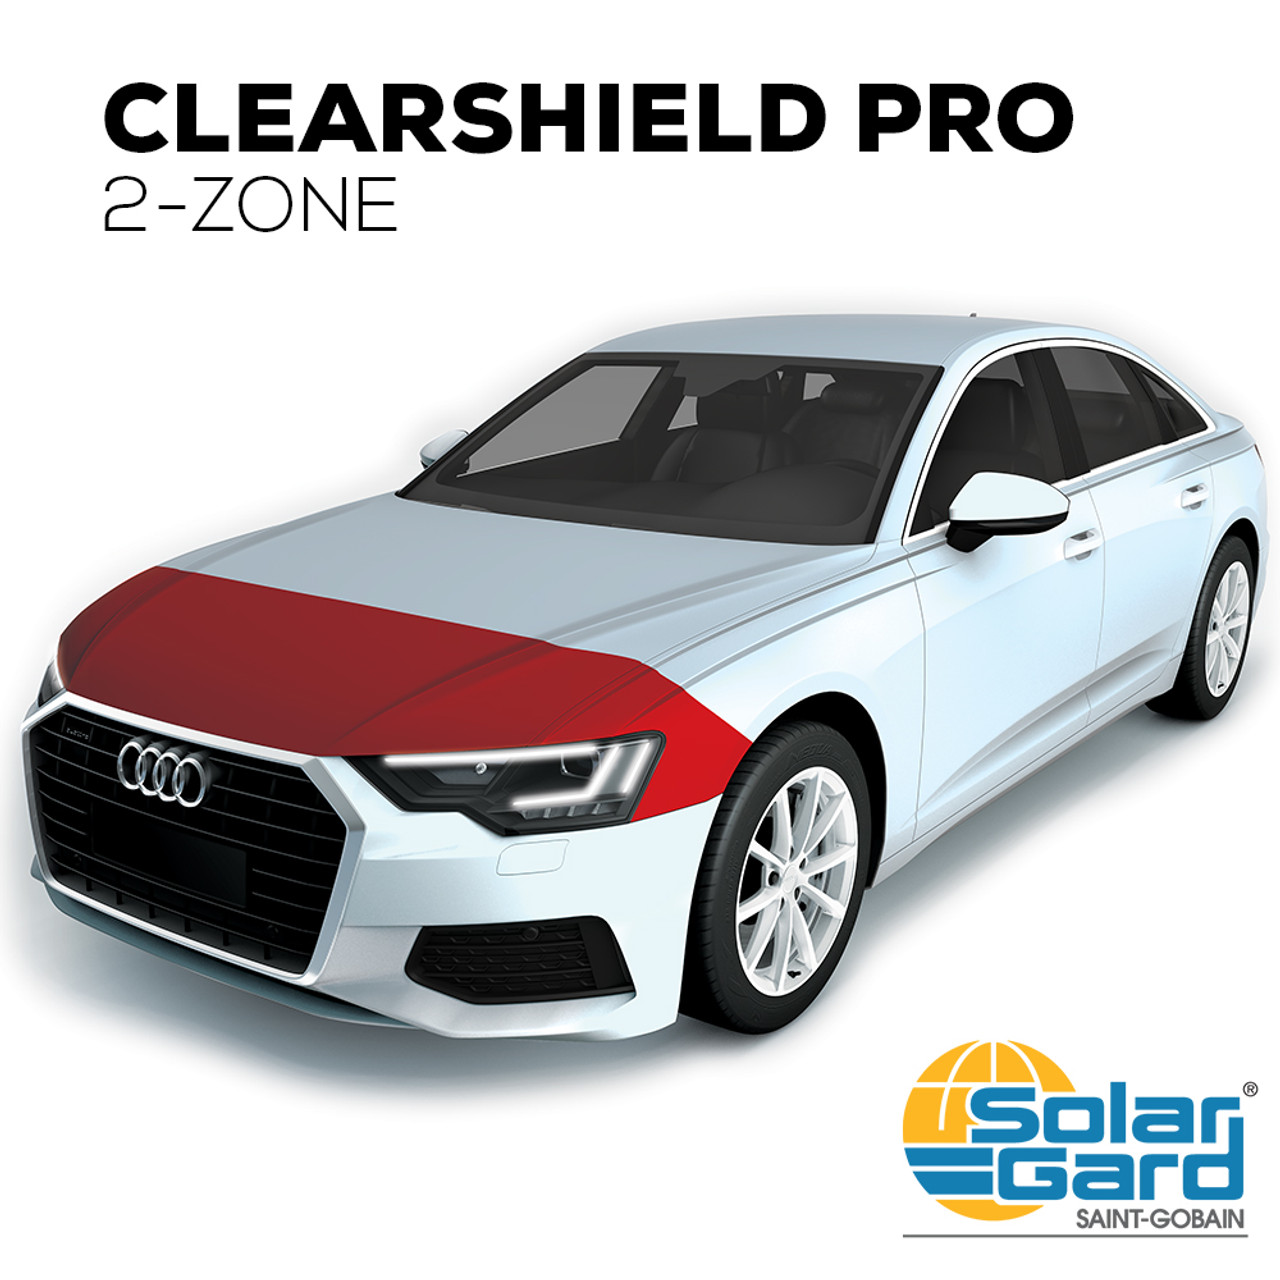 2-Zone Clear Bra Pro - Clearshield Pro Paint Protection by Solar Gard